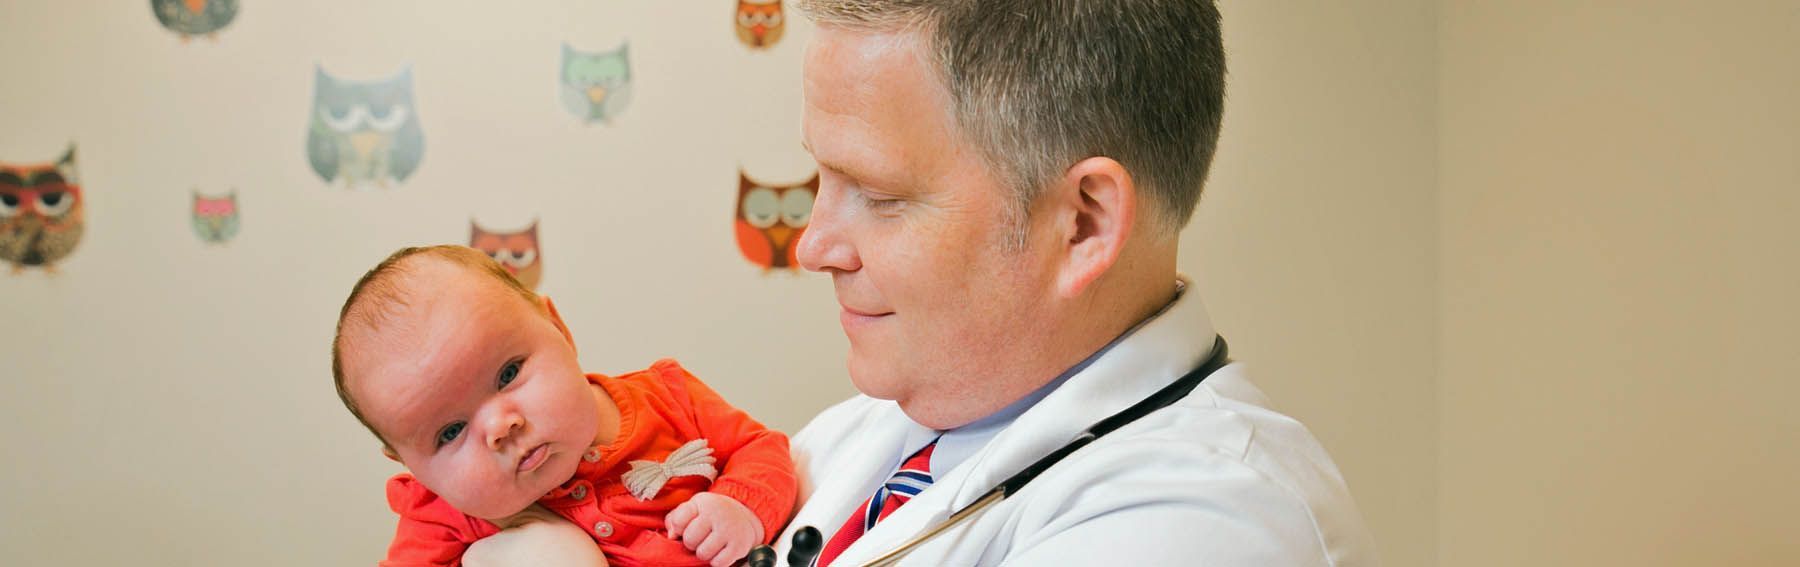 a doctor is holding a baby with owls on the wall behind him